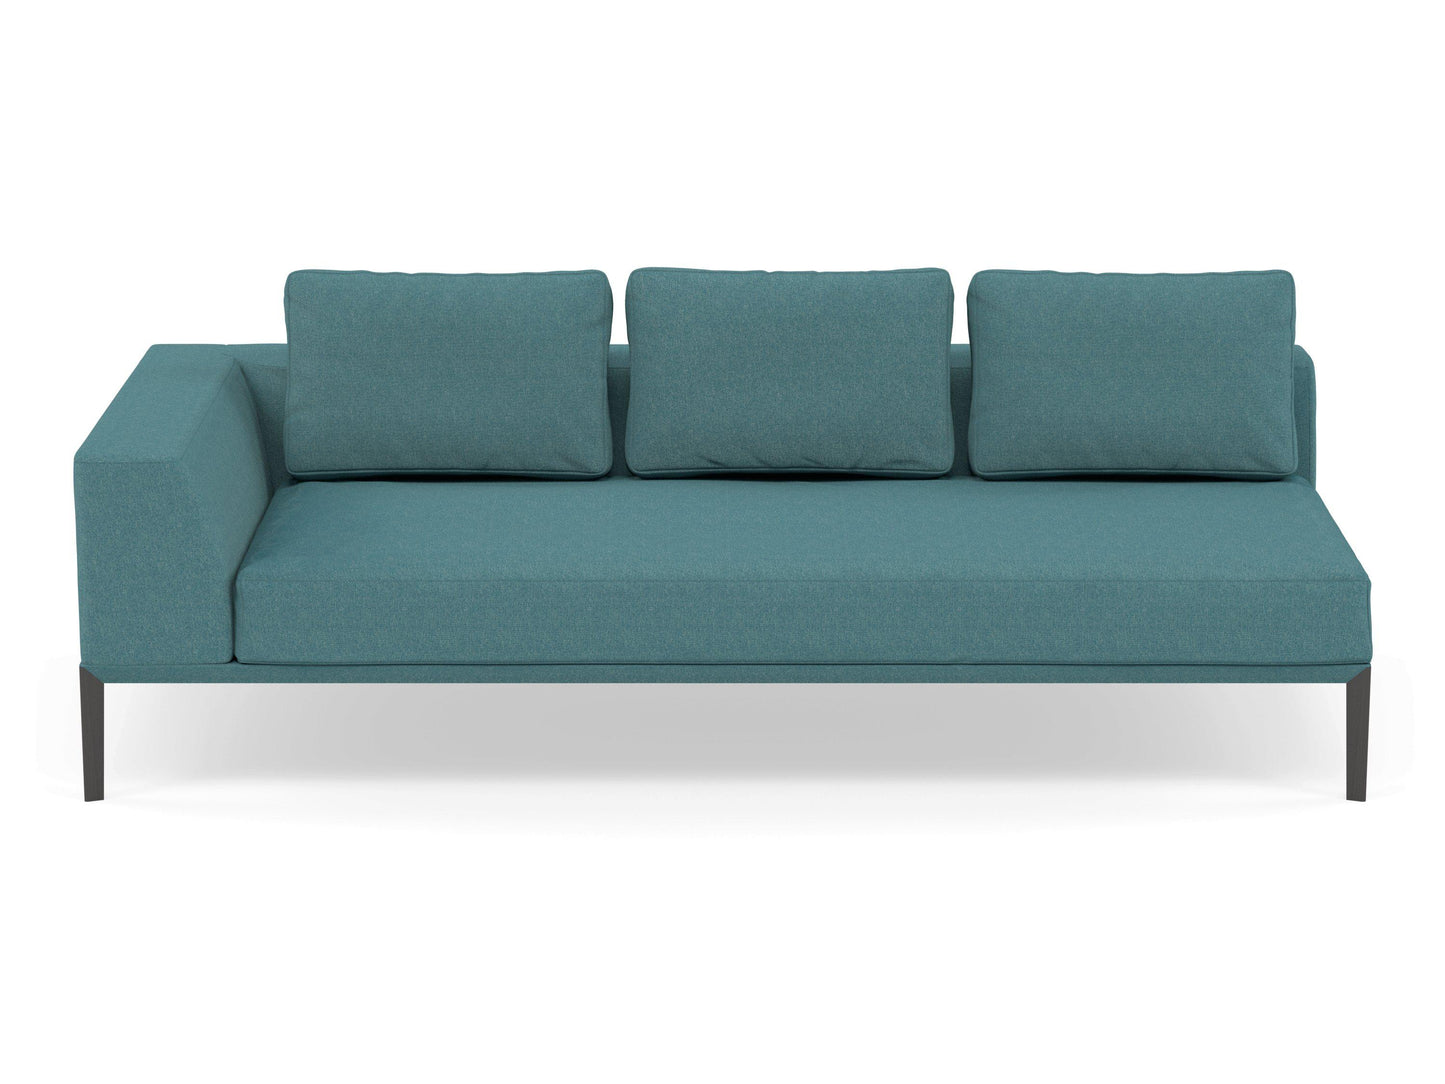 Modern 3 Seater Chaise Lounge Style Sofa with Right Armrest in Teal Blue Fabric-Wenge Oak-Distinct Designs (London) Ltd